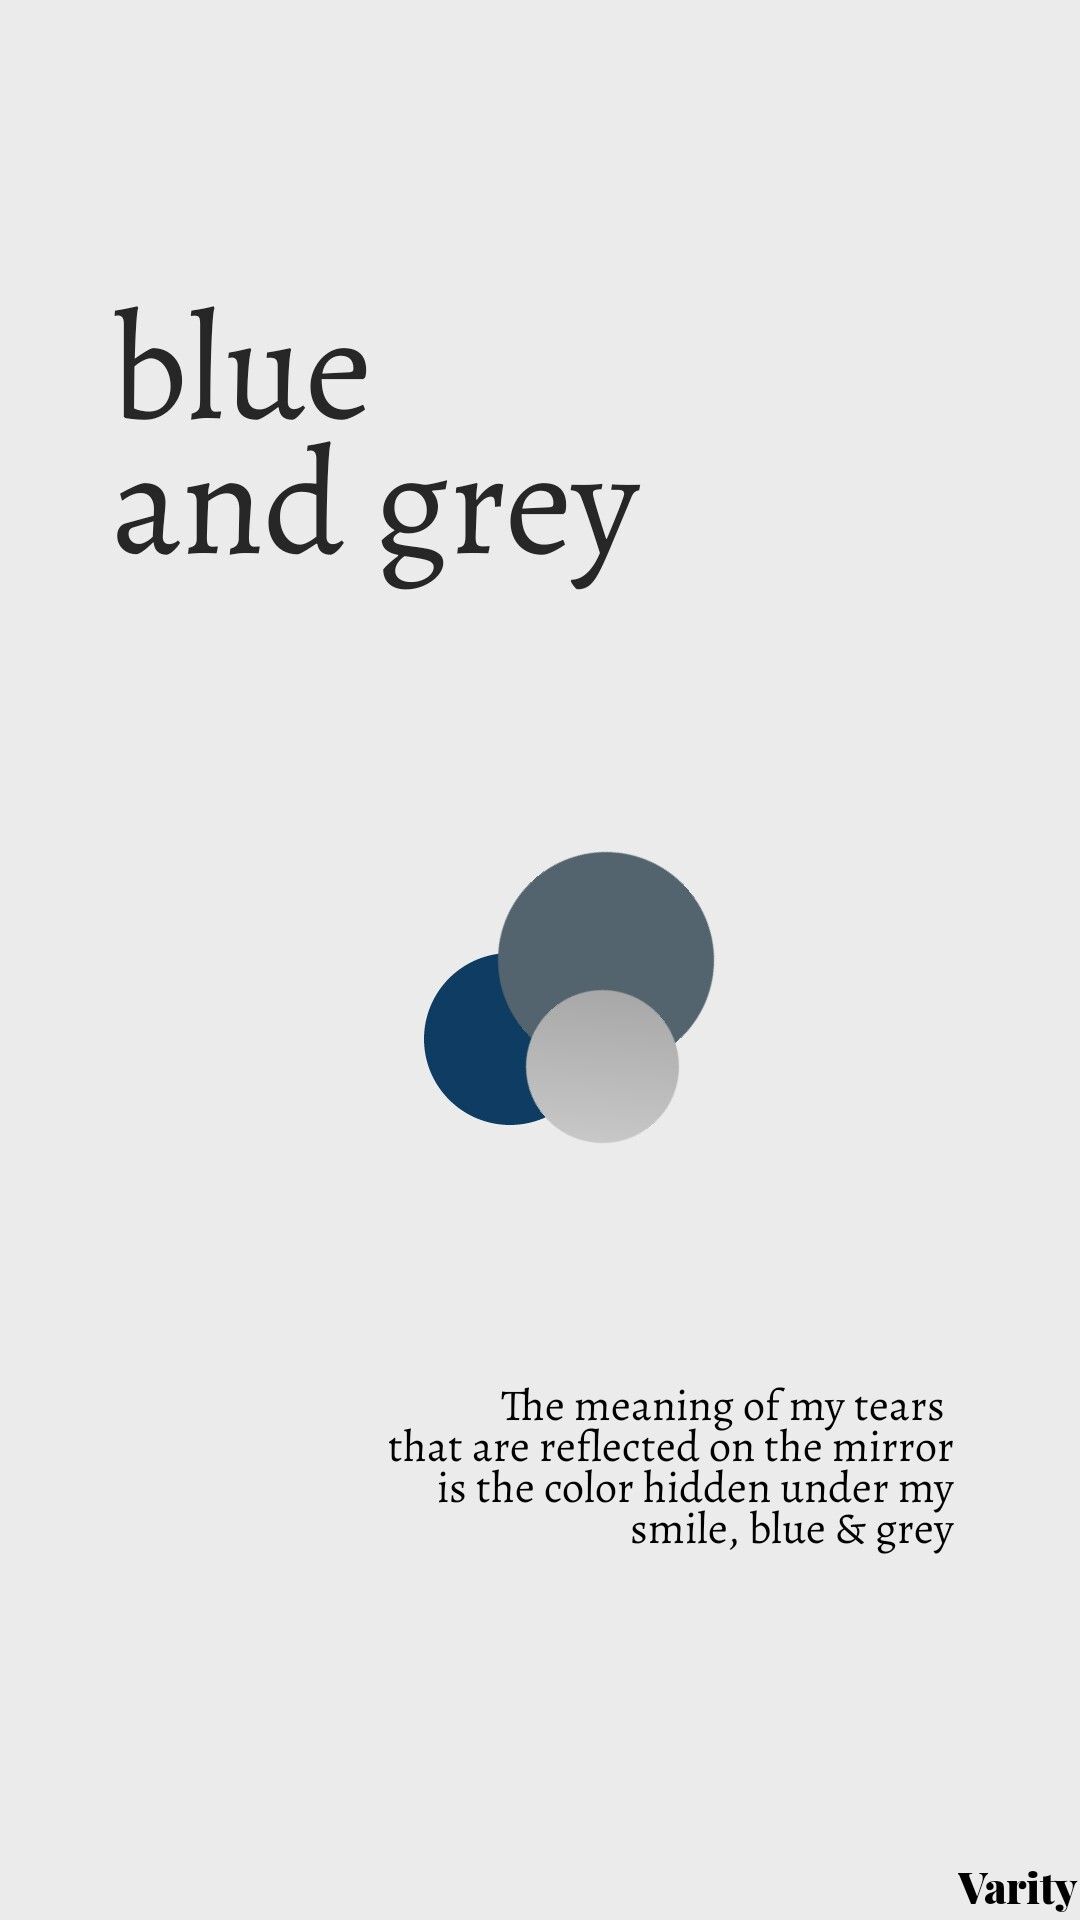 Blue & Grey By BTS Aesthetic Wallpaper Lockscreens. Bts Quotes, Bts Lyrics Quotes, Bts Wallpaper Lyrics